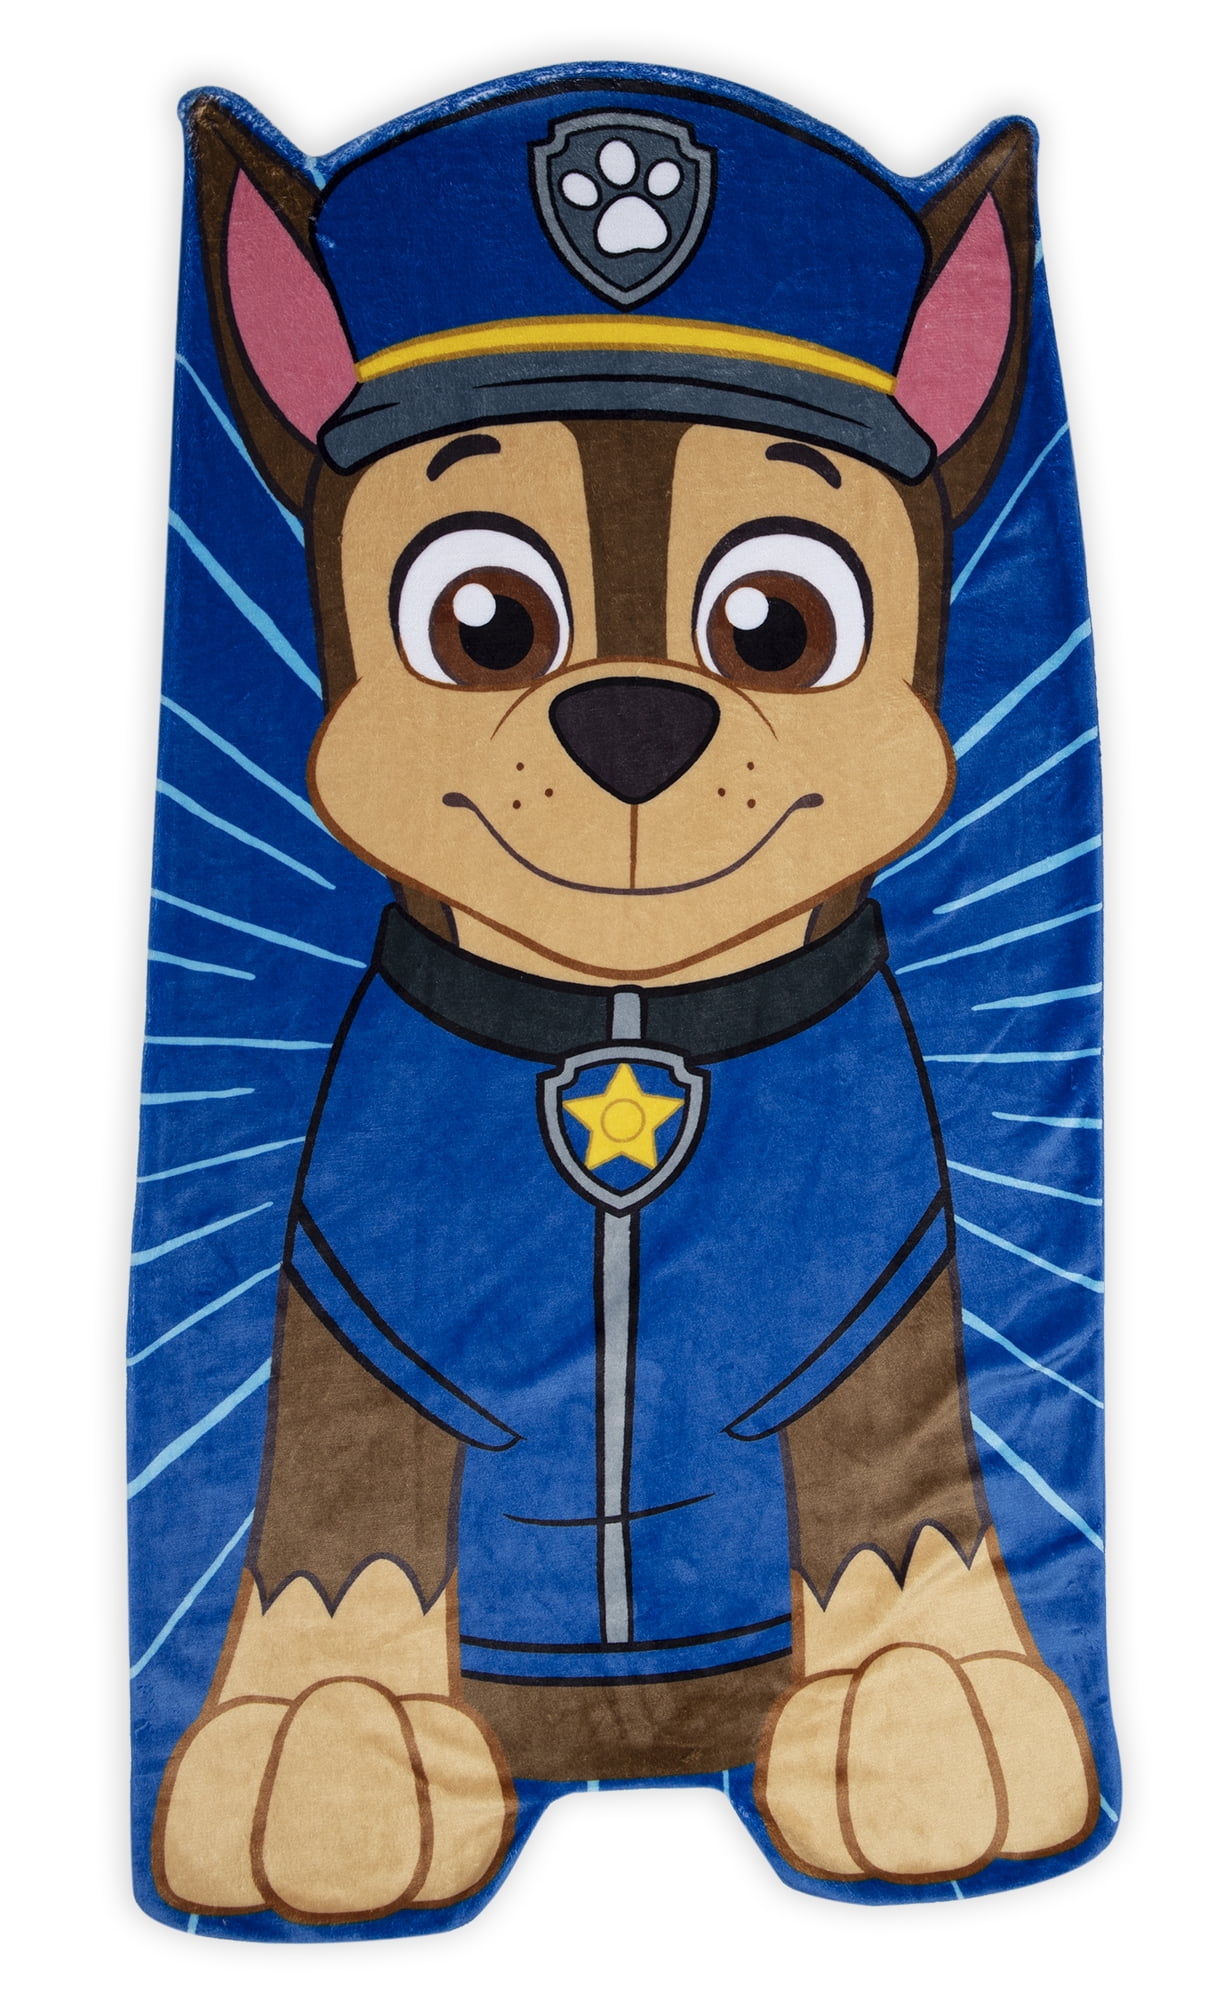 Plush Paw Patrol Blanket and Cozy Blanket Design Extra Comfy Ages 3-5 Soft Cuddly Skye Themed Slumber Pal Wearable Toddler Blanket 